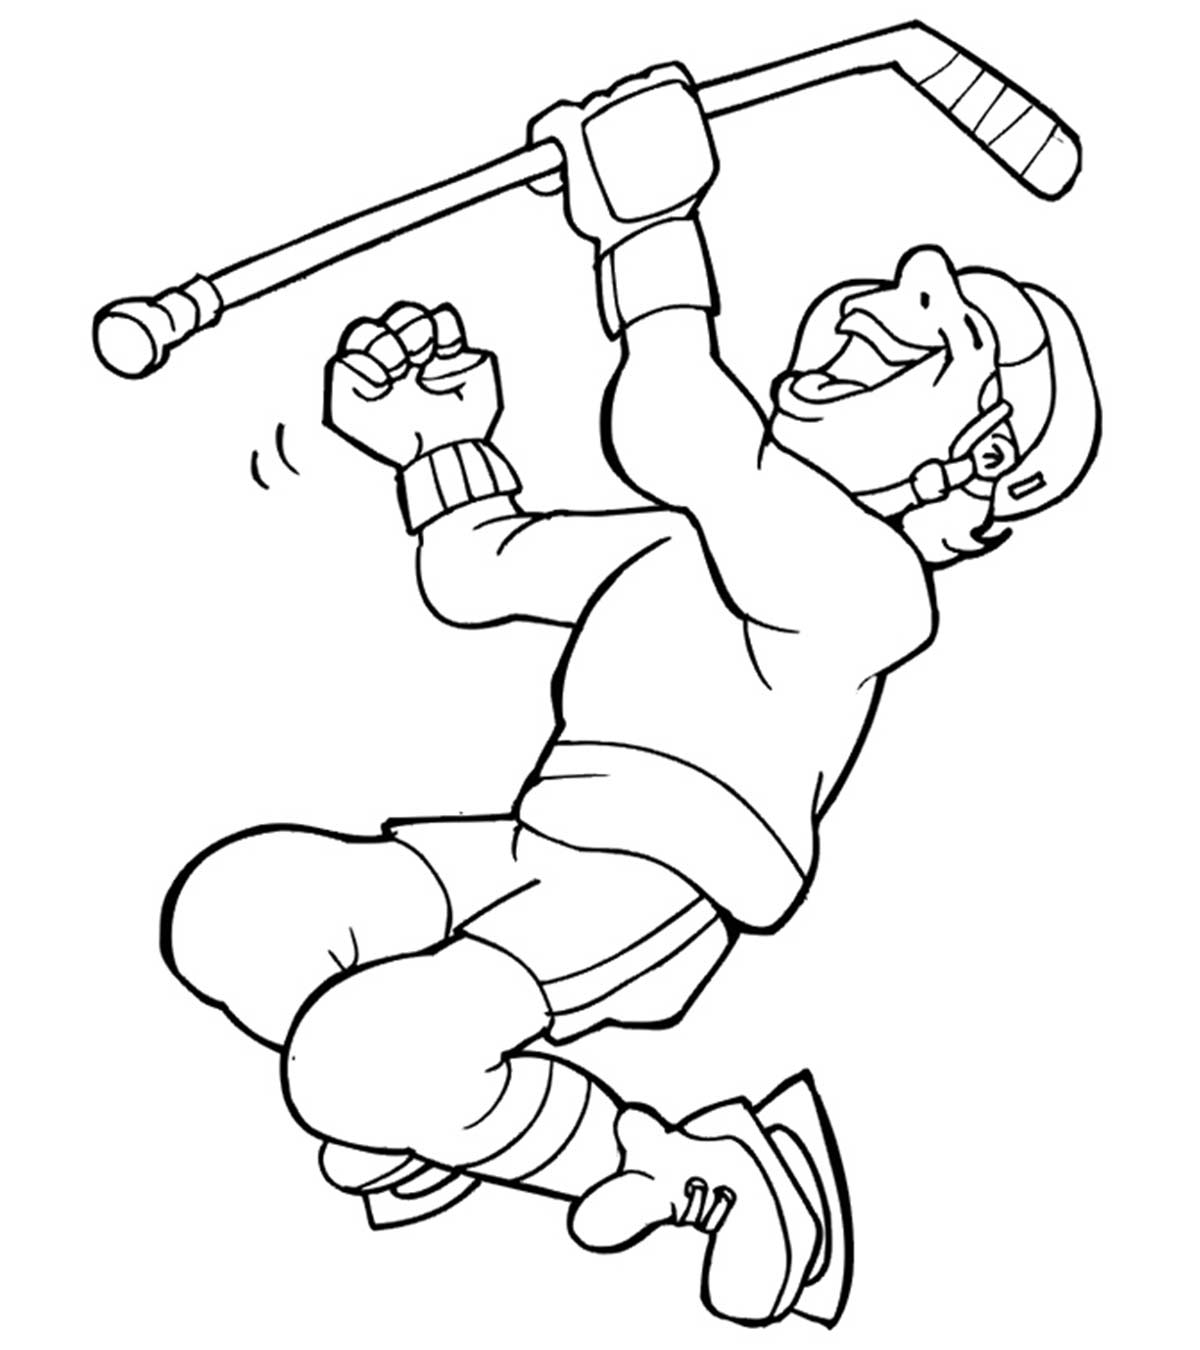 Sports Coloring Pages - MomJunction